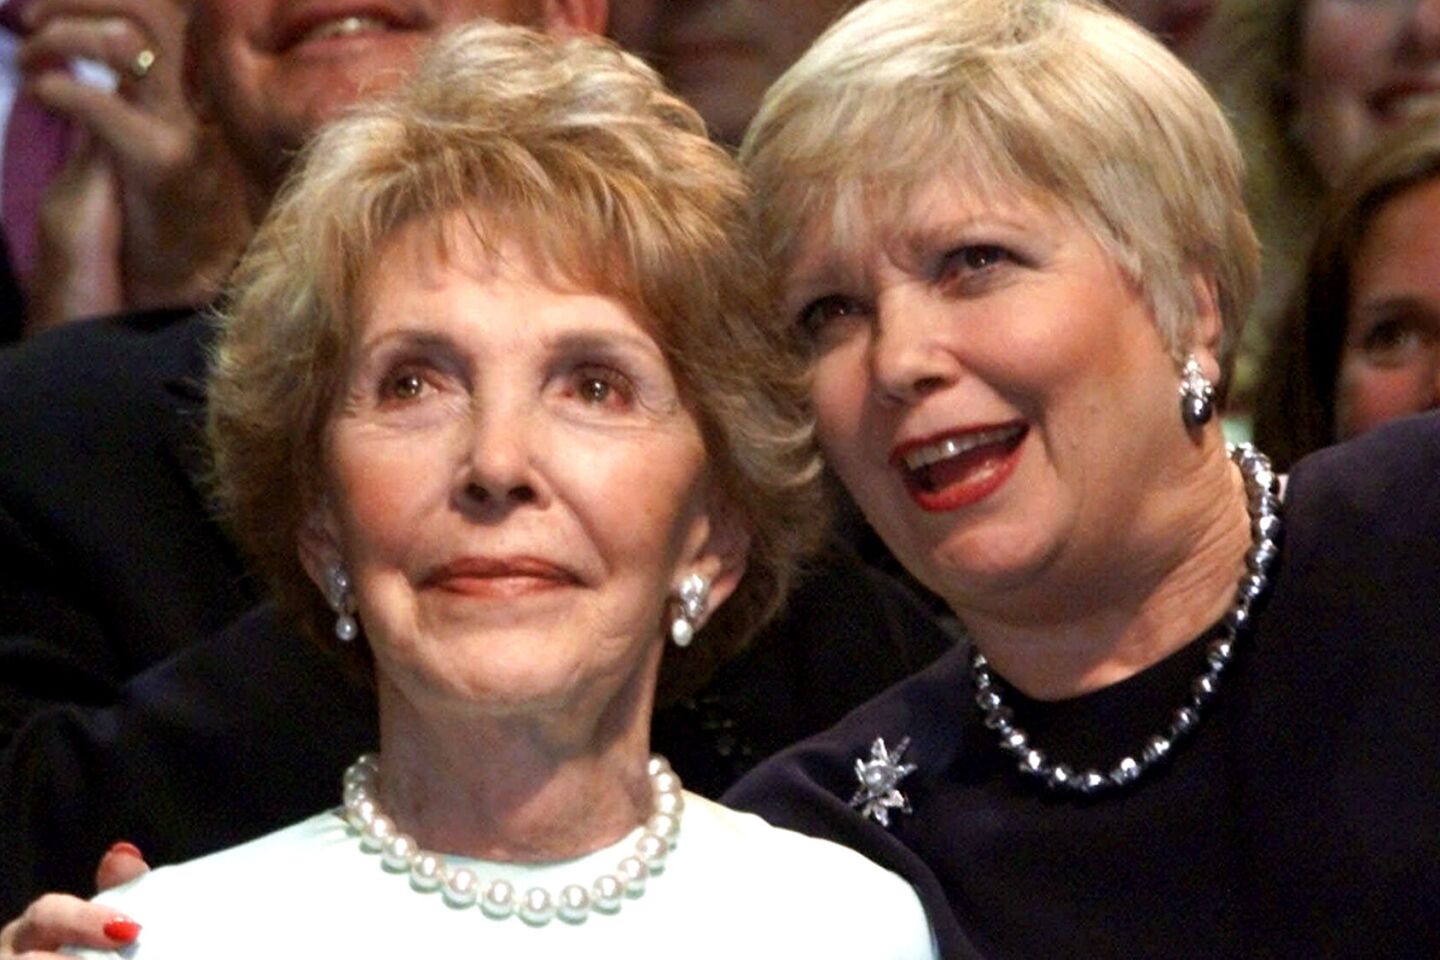 Nancy Reagan with stepdaughter Maureen at the 2000 Republican National Convention in Philadelphia, a year before Maureen's death from skin cancer.